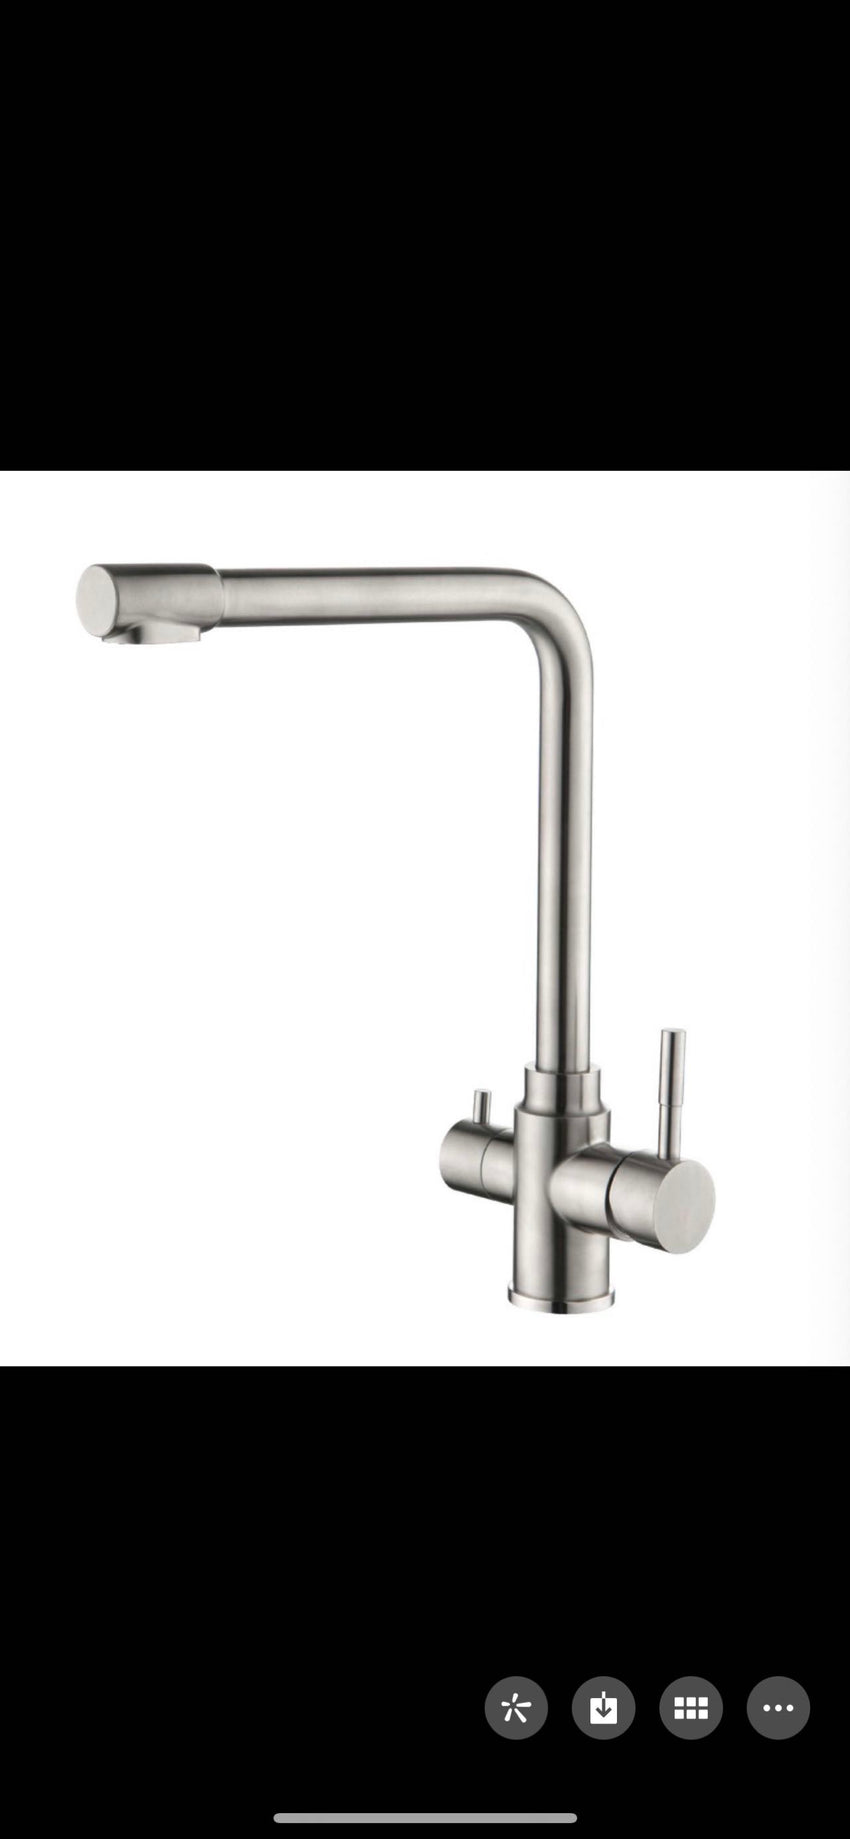 Stainless steel 3-Way Mixer Tap